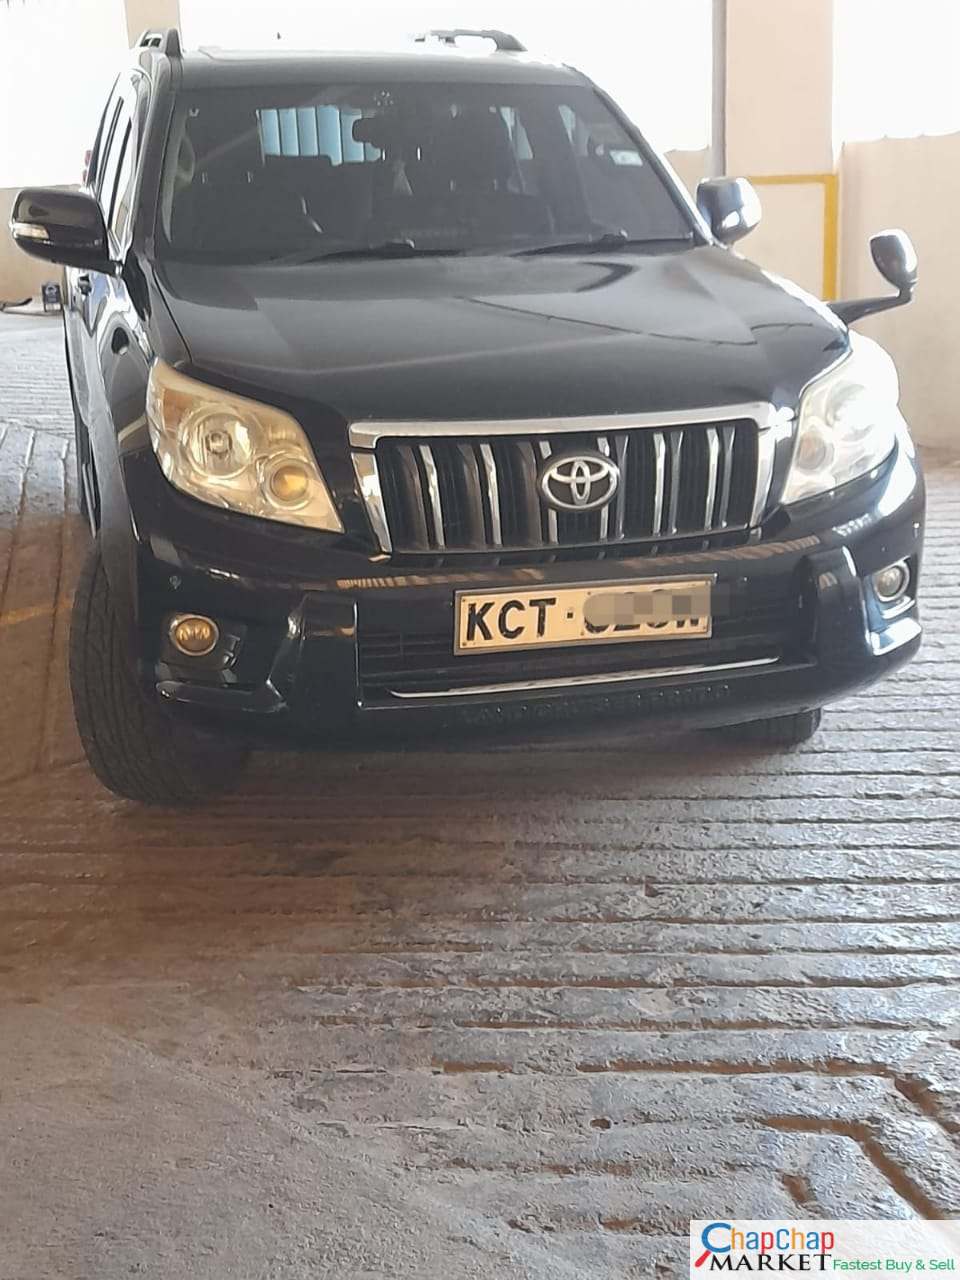 Toyota Prado j150 with SUNROOF You Pay 40% Deposit 70% installments Trade in OK as New